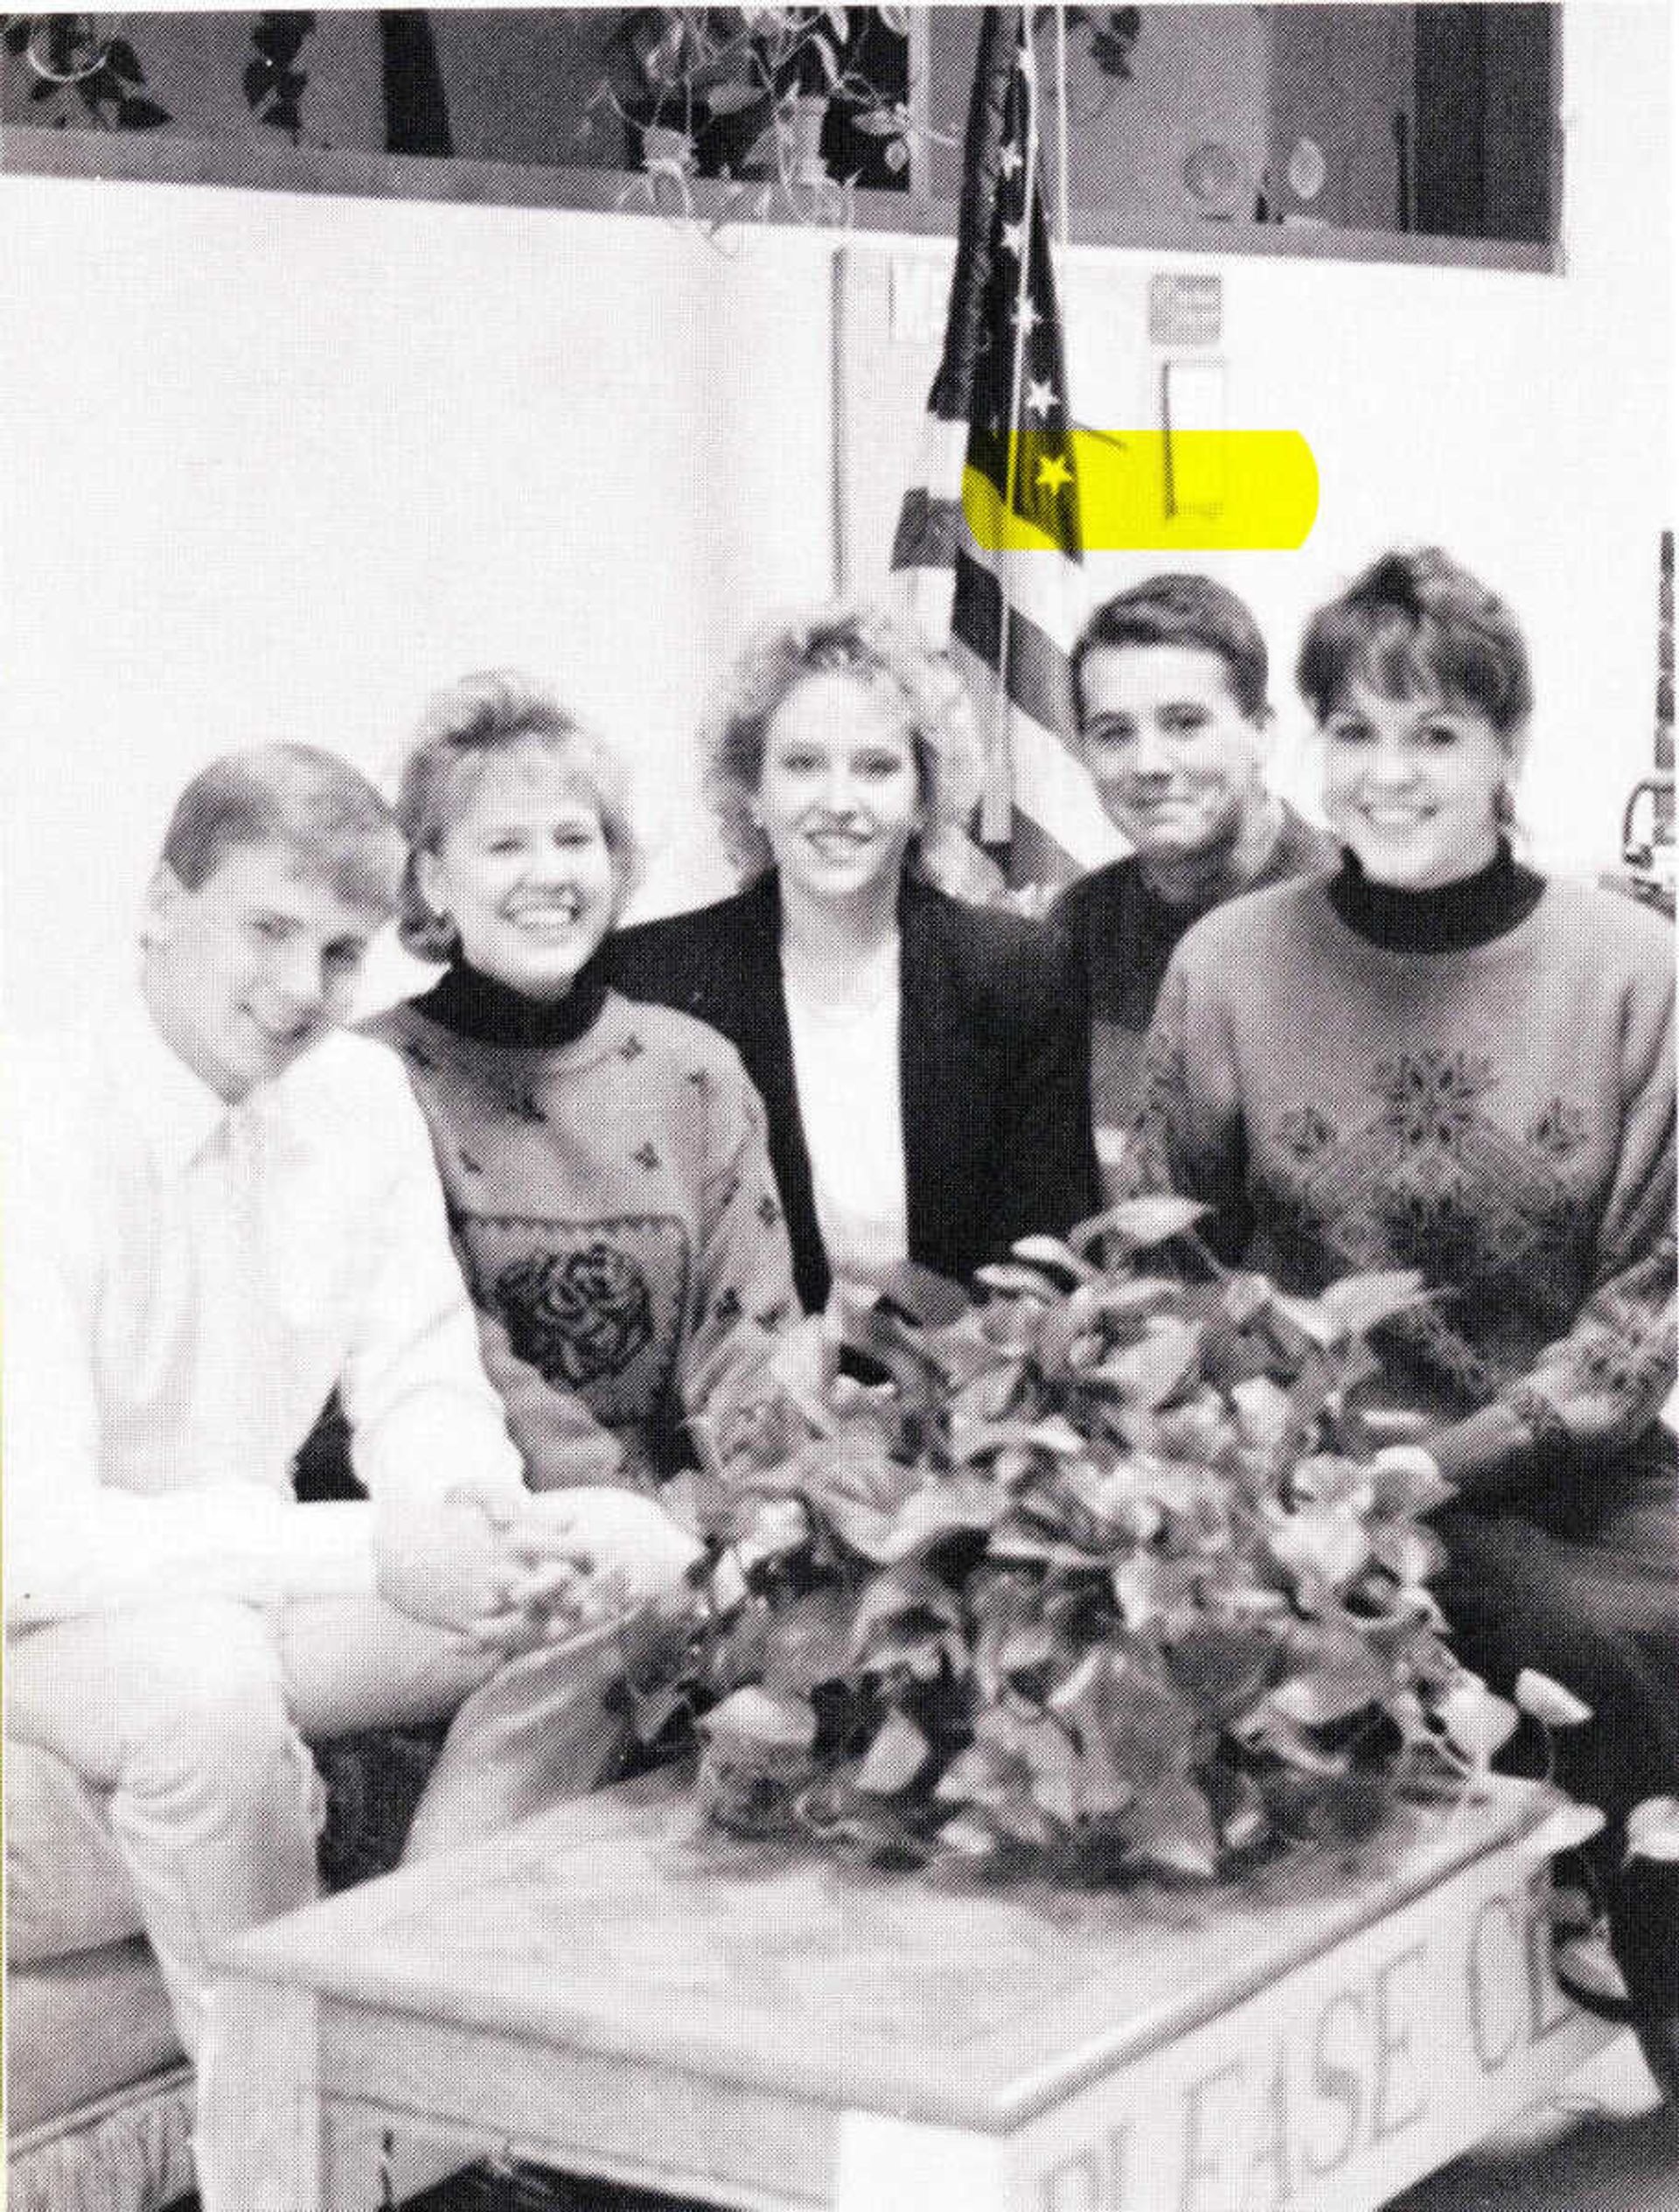 Officers of Student Government pose for a picture taken in 1989. From this point onward, the organization would have and hold the name Student Government, creating what it is today.